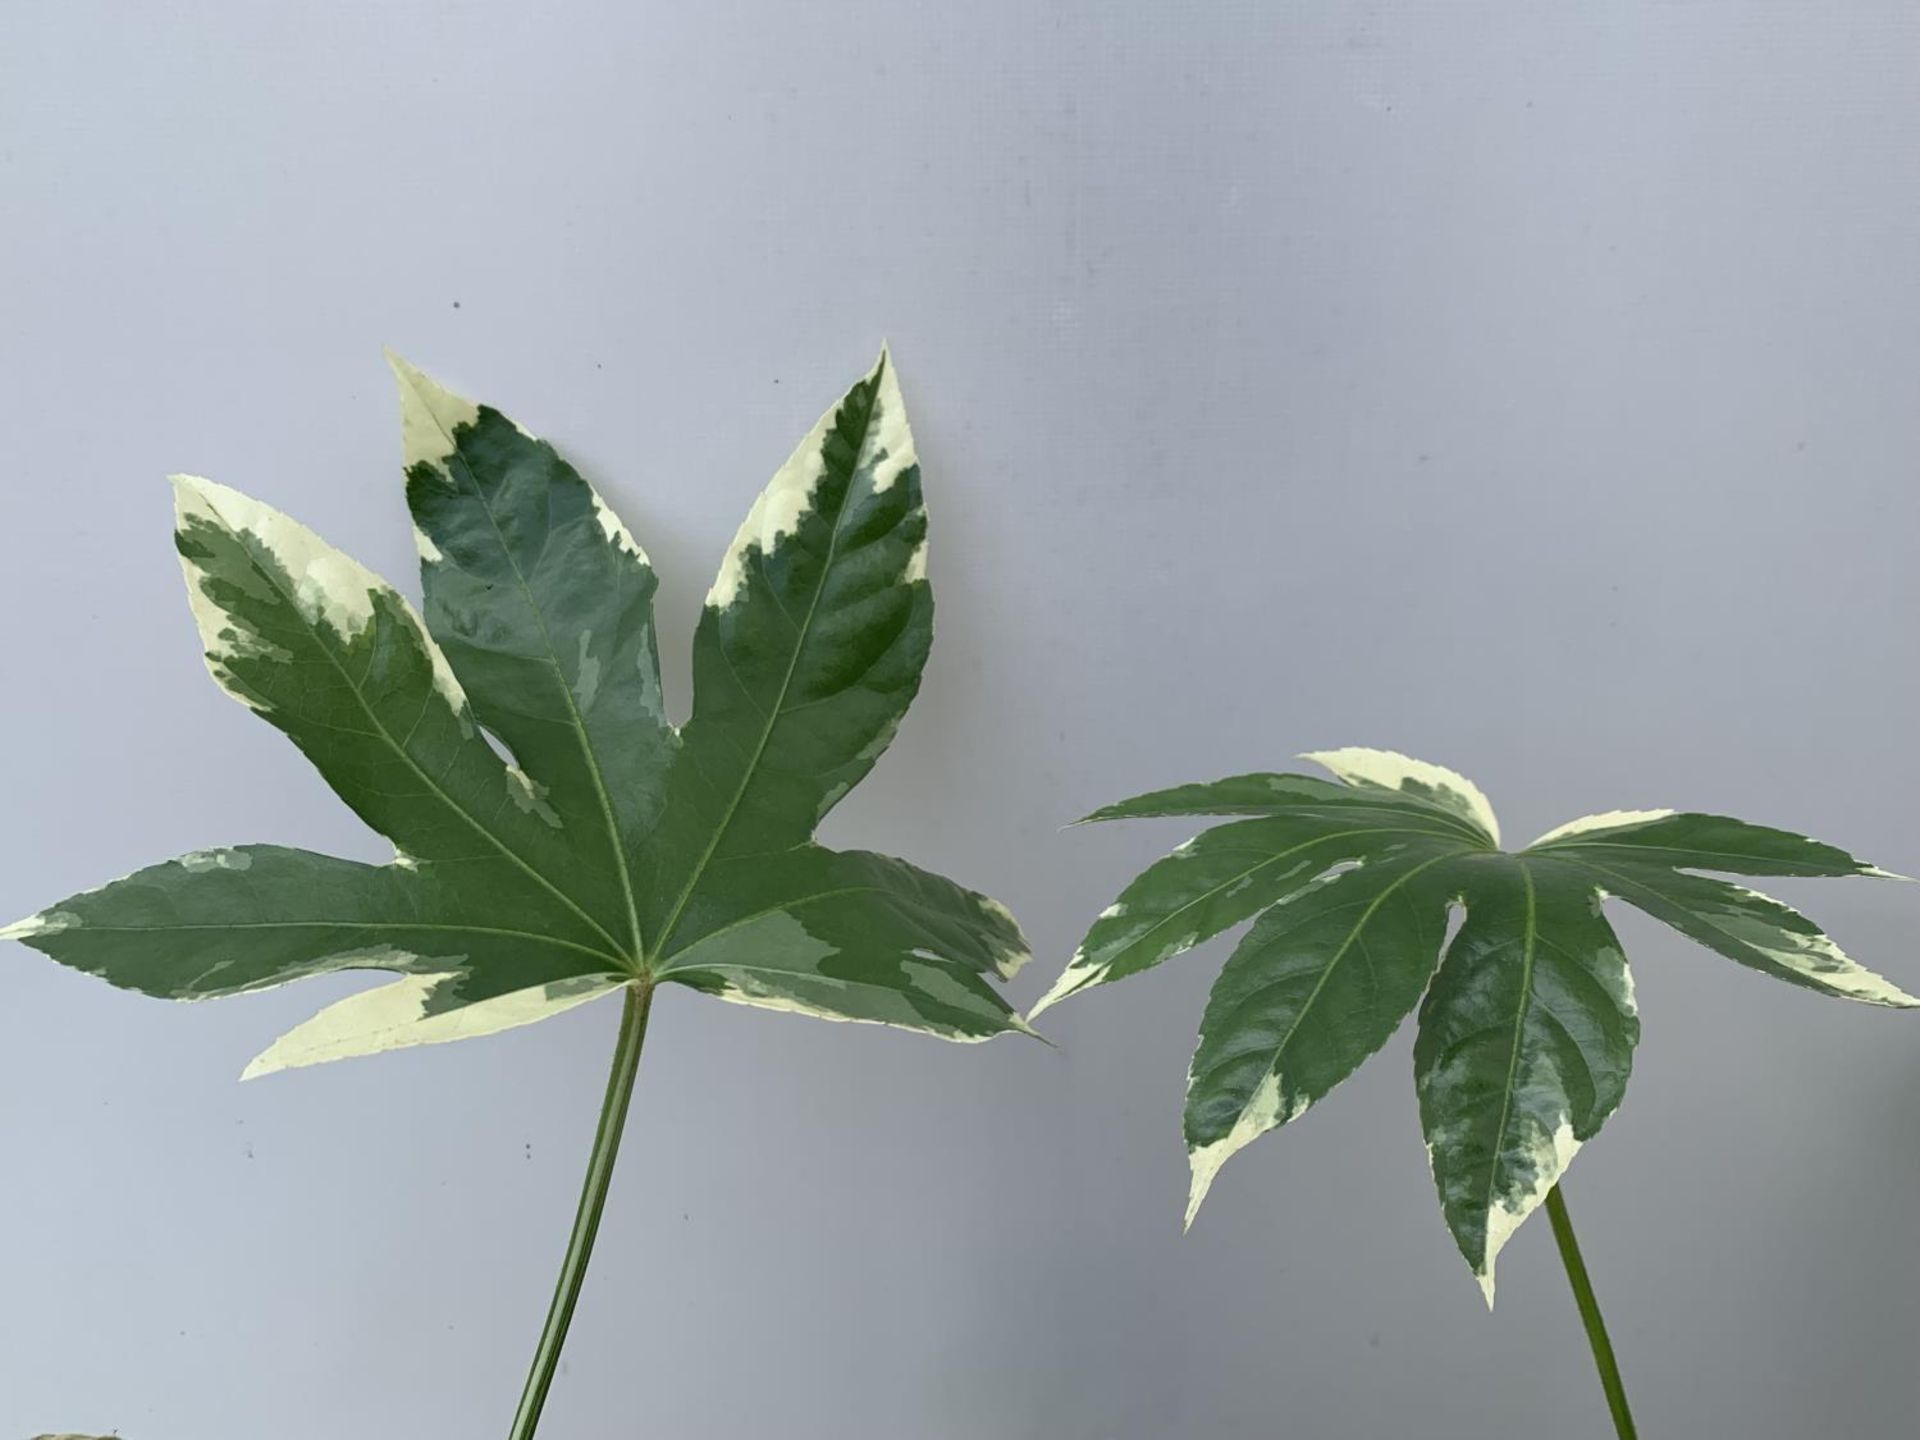 TWO FATSIA JUNGLE GARDEN JAPONICA VARIEGATA IN 2 LTR POTS 50CM TALL PLUS VAT TO BE SOLD FOR THE TWO - Image 10 of 10